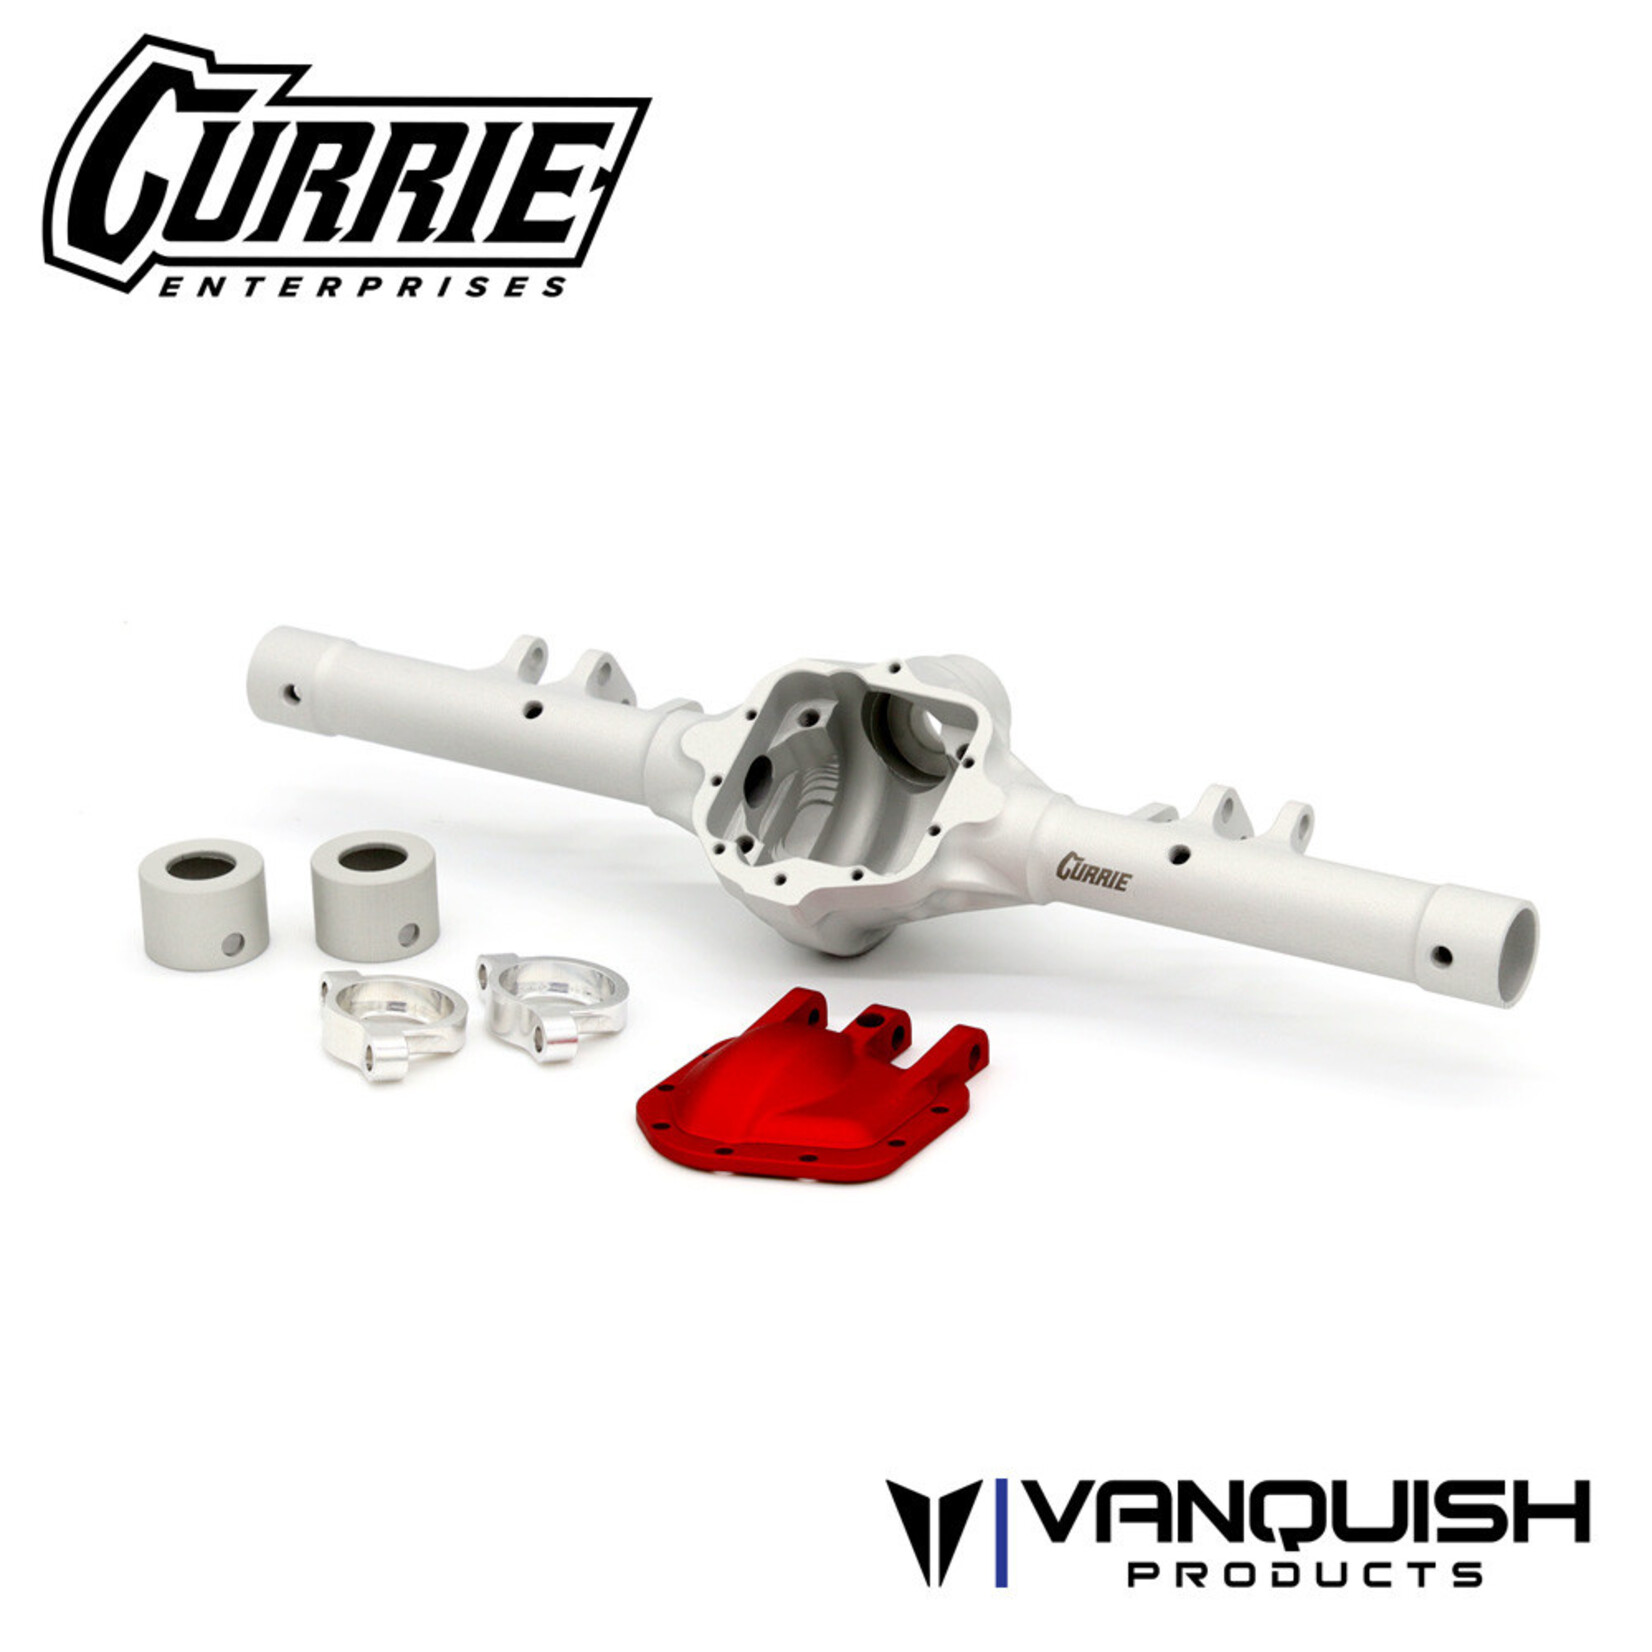 Vanquish Products Vanquish Products Currie HD44 VS4-10 Rear Axle (Clear) #VPS08663